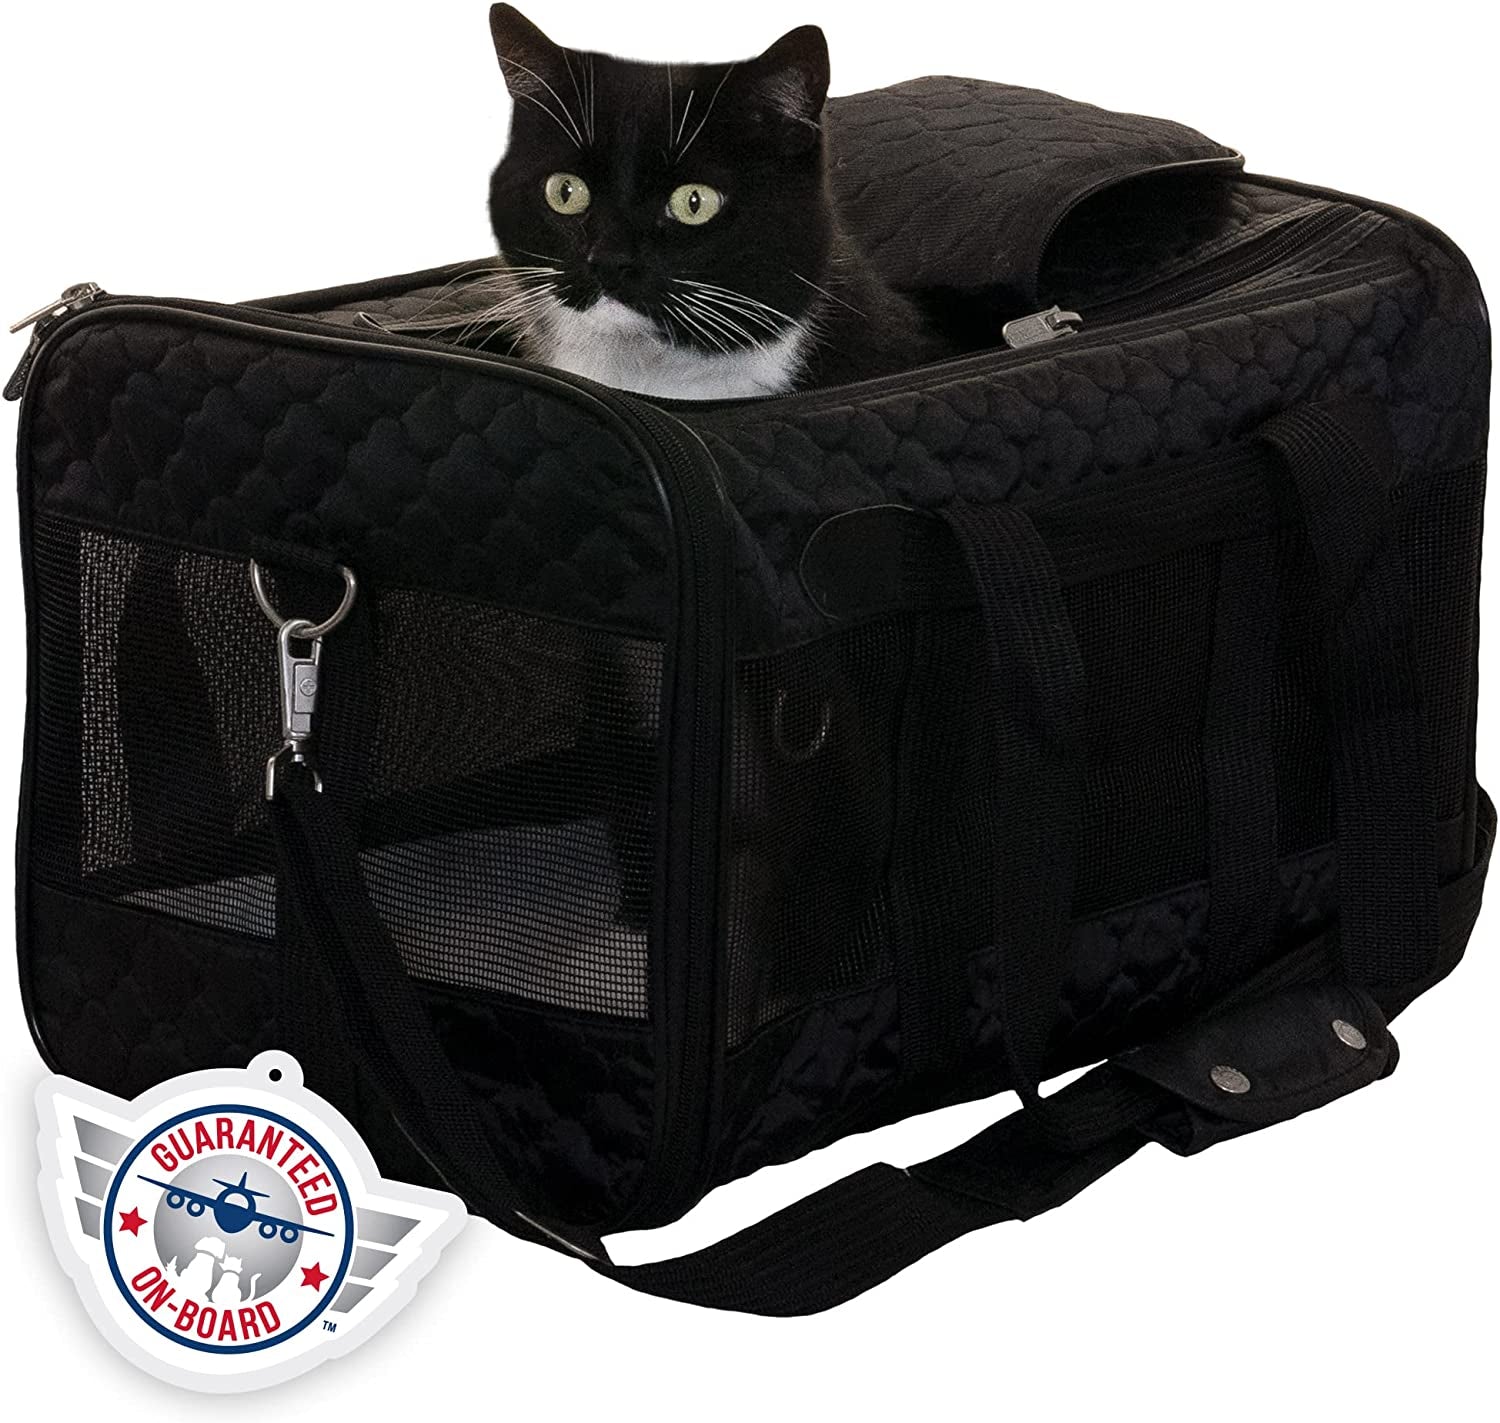 Sherpa Original Deluxe Travel Pet Carrier, Airline Approved - Black Lattice, Large